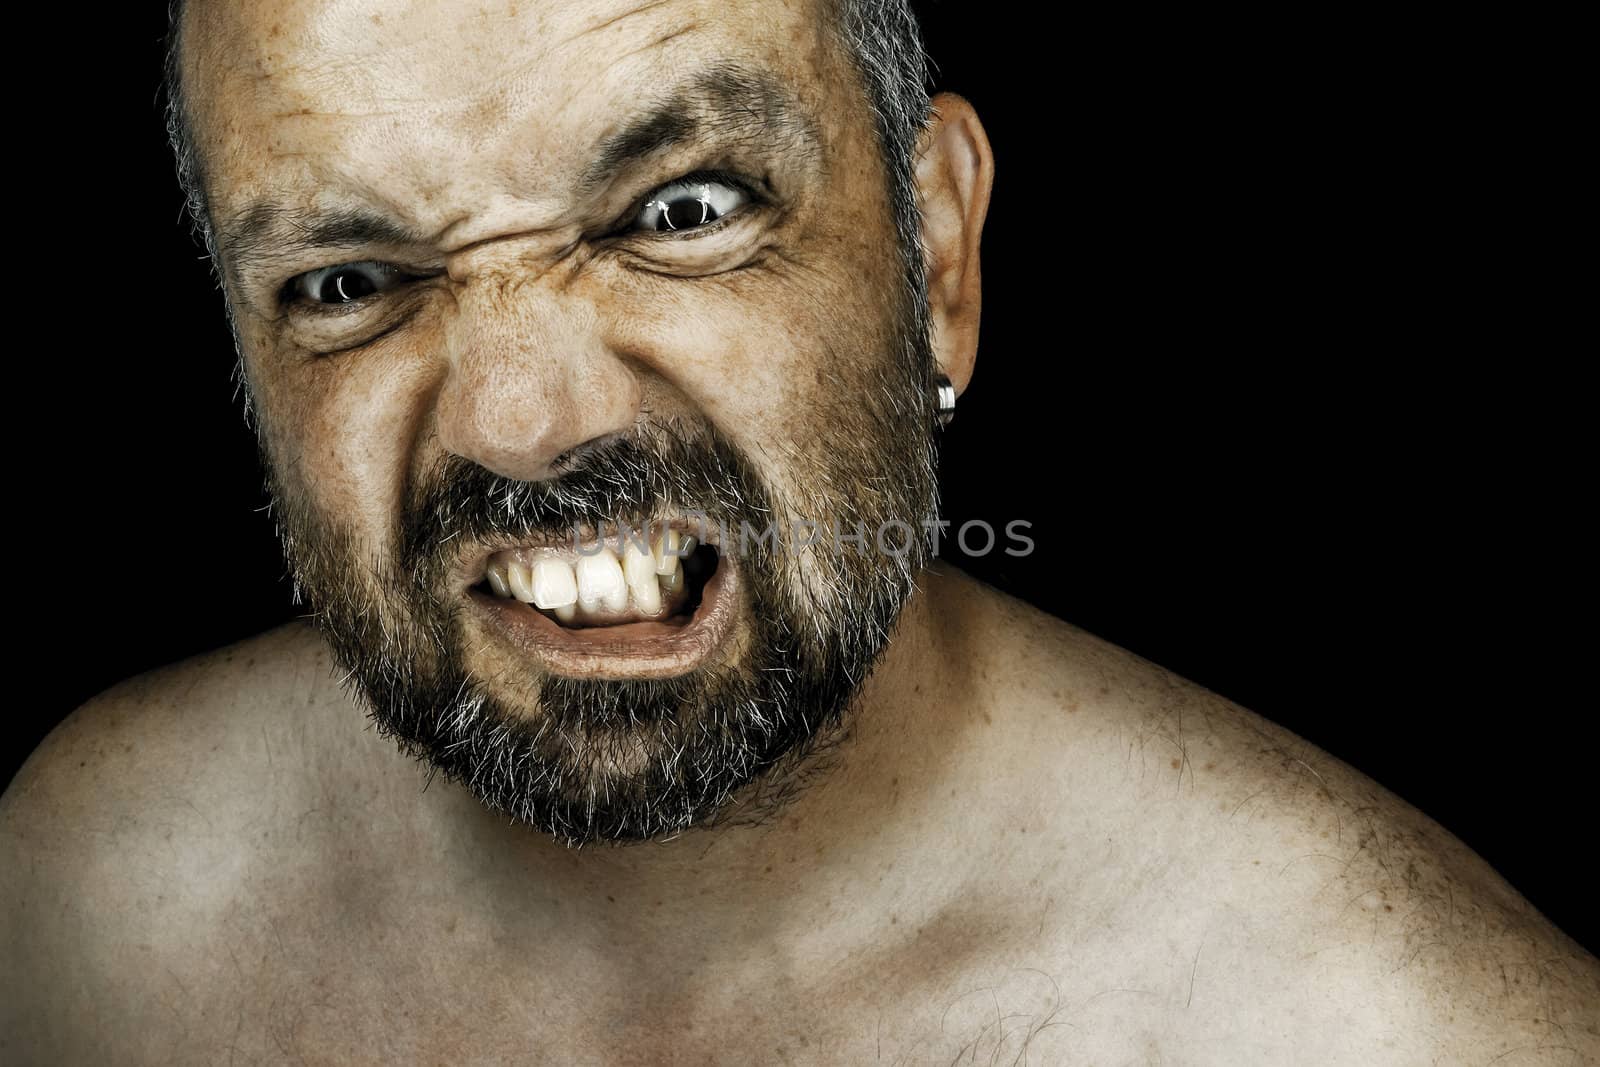 An image of an angry man with a beard